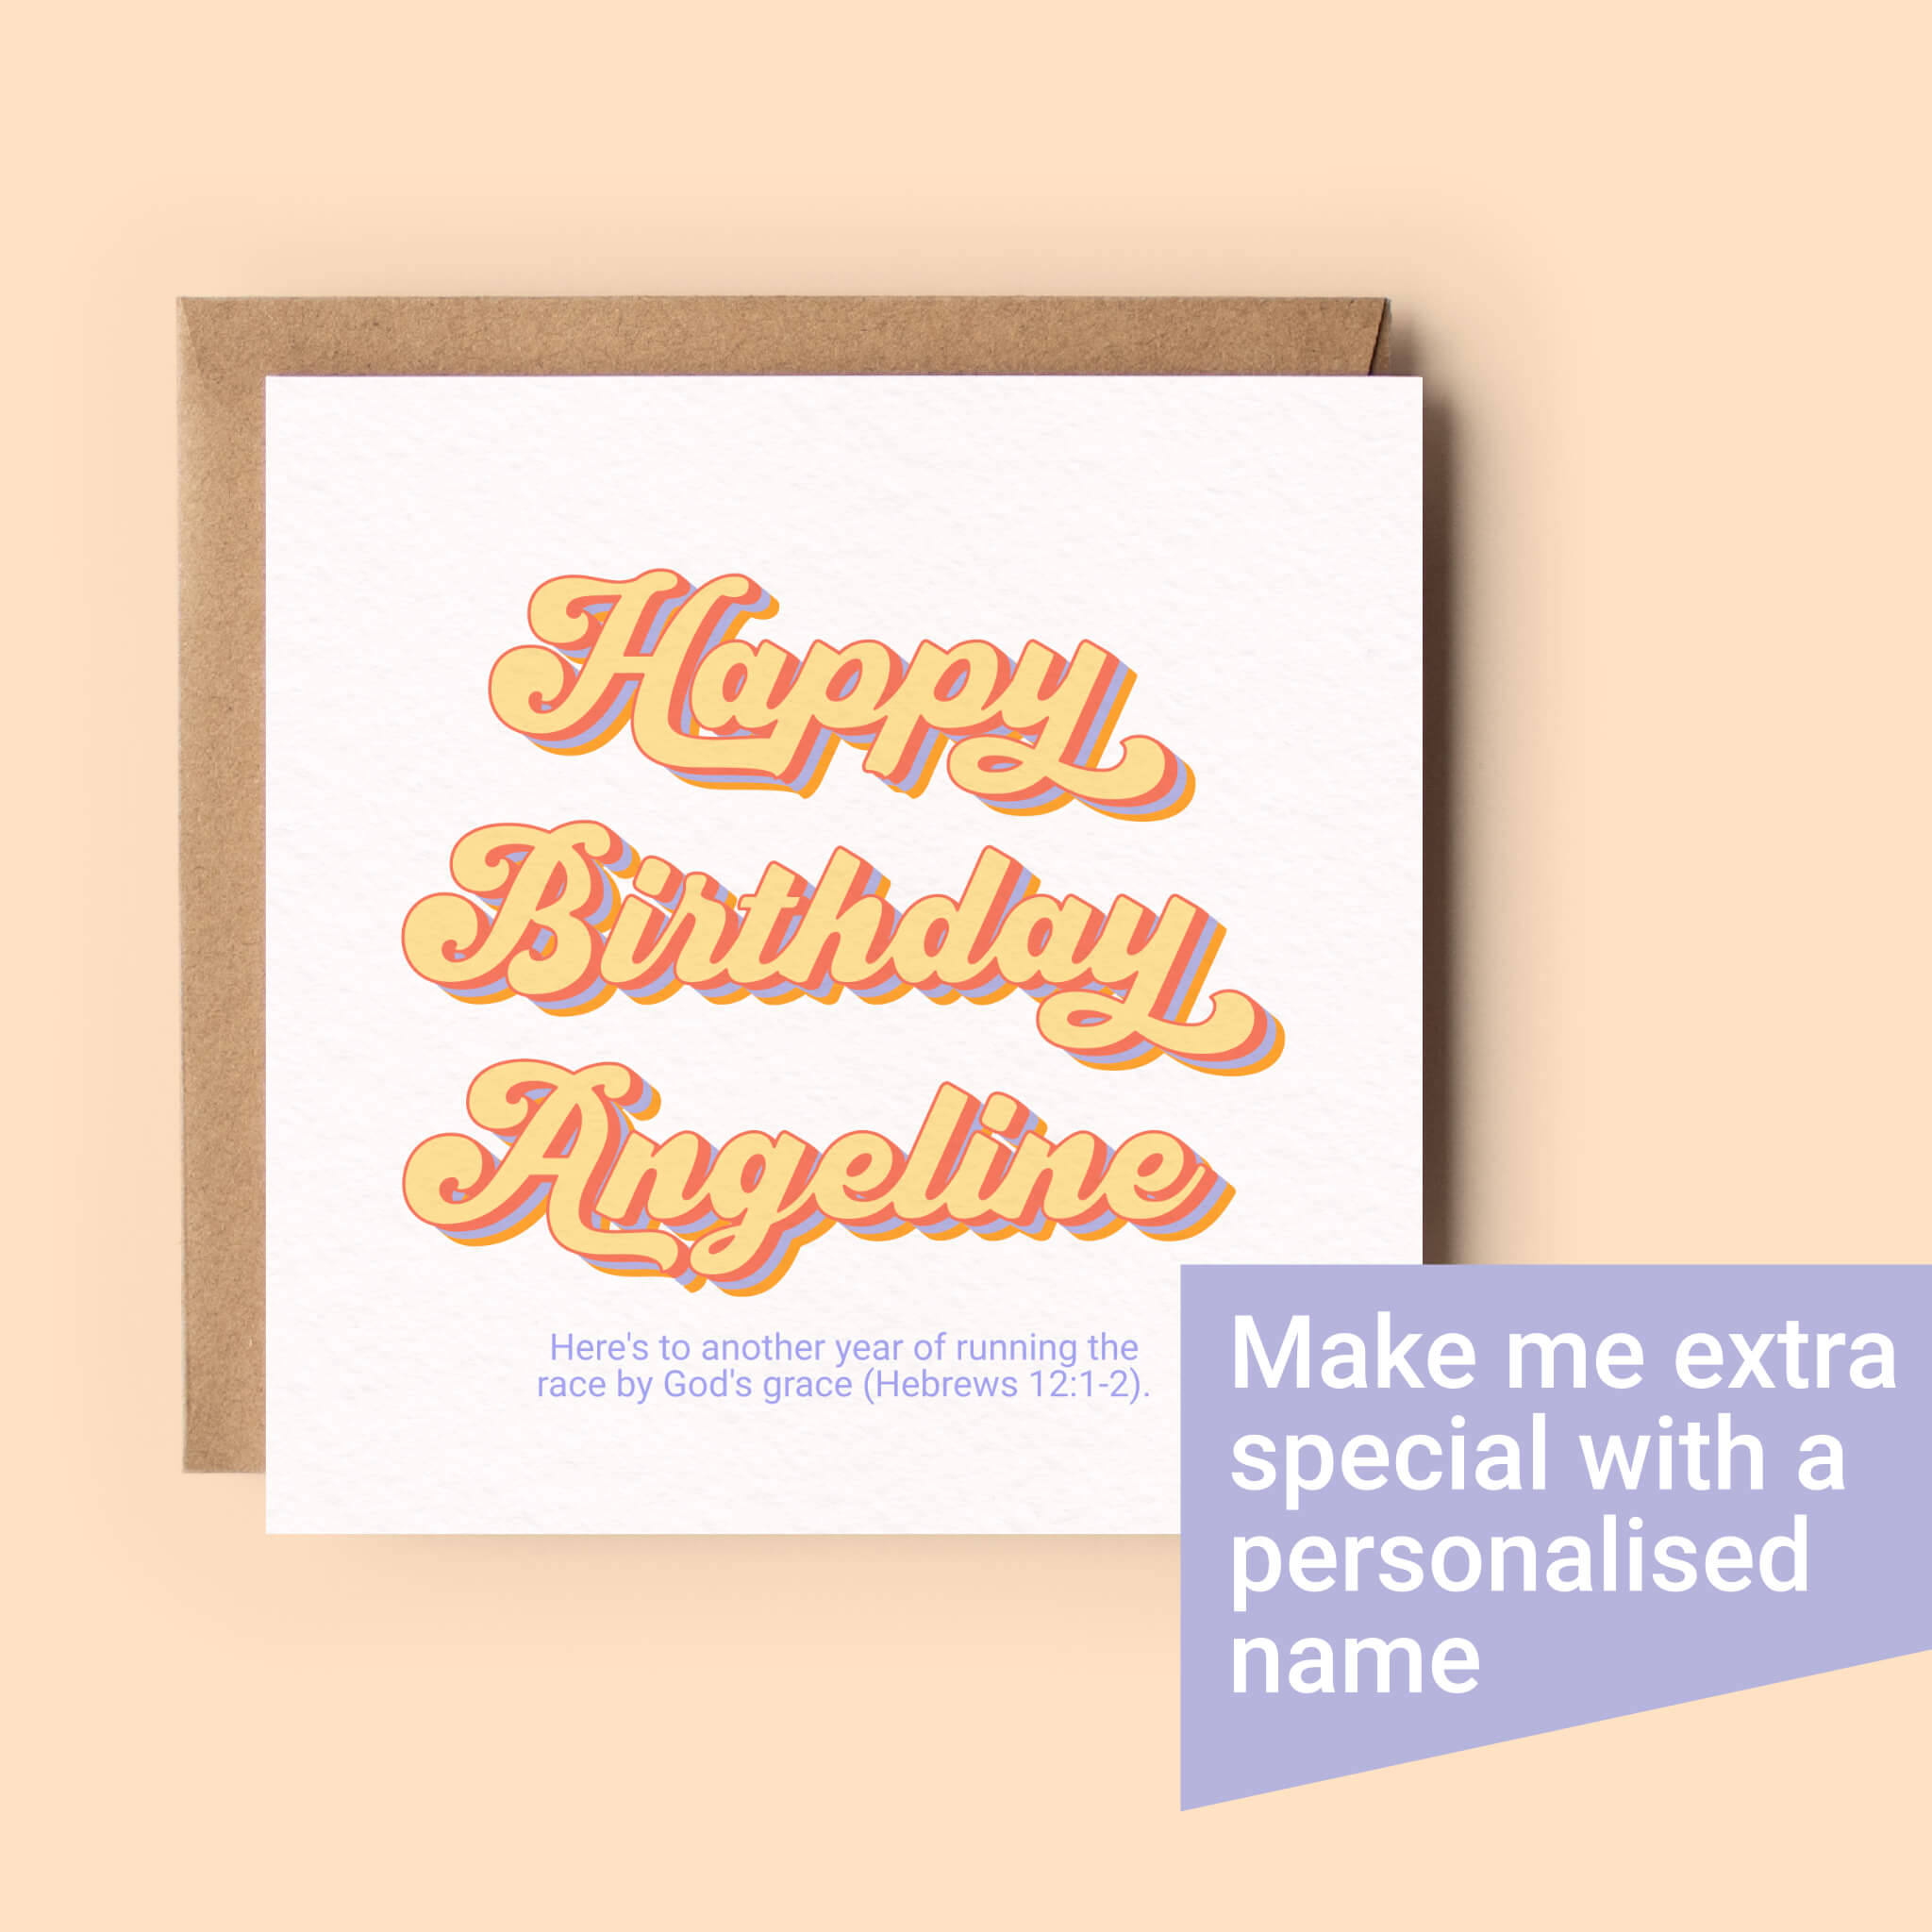 Personalisable bright retro Christian birthday card featuring encouragement from Hebrews 12